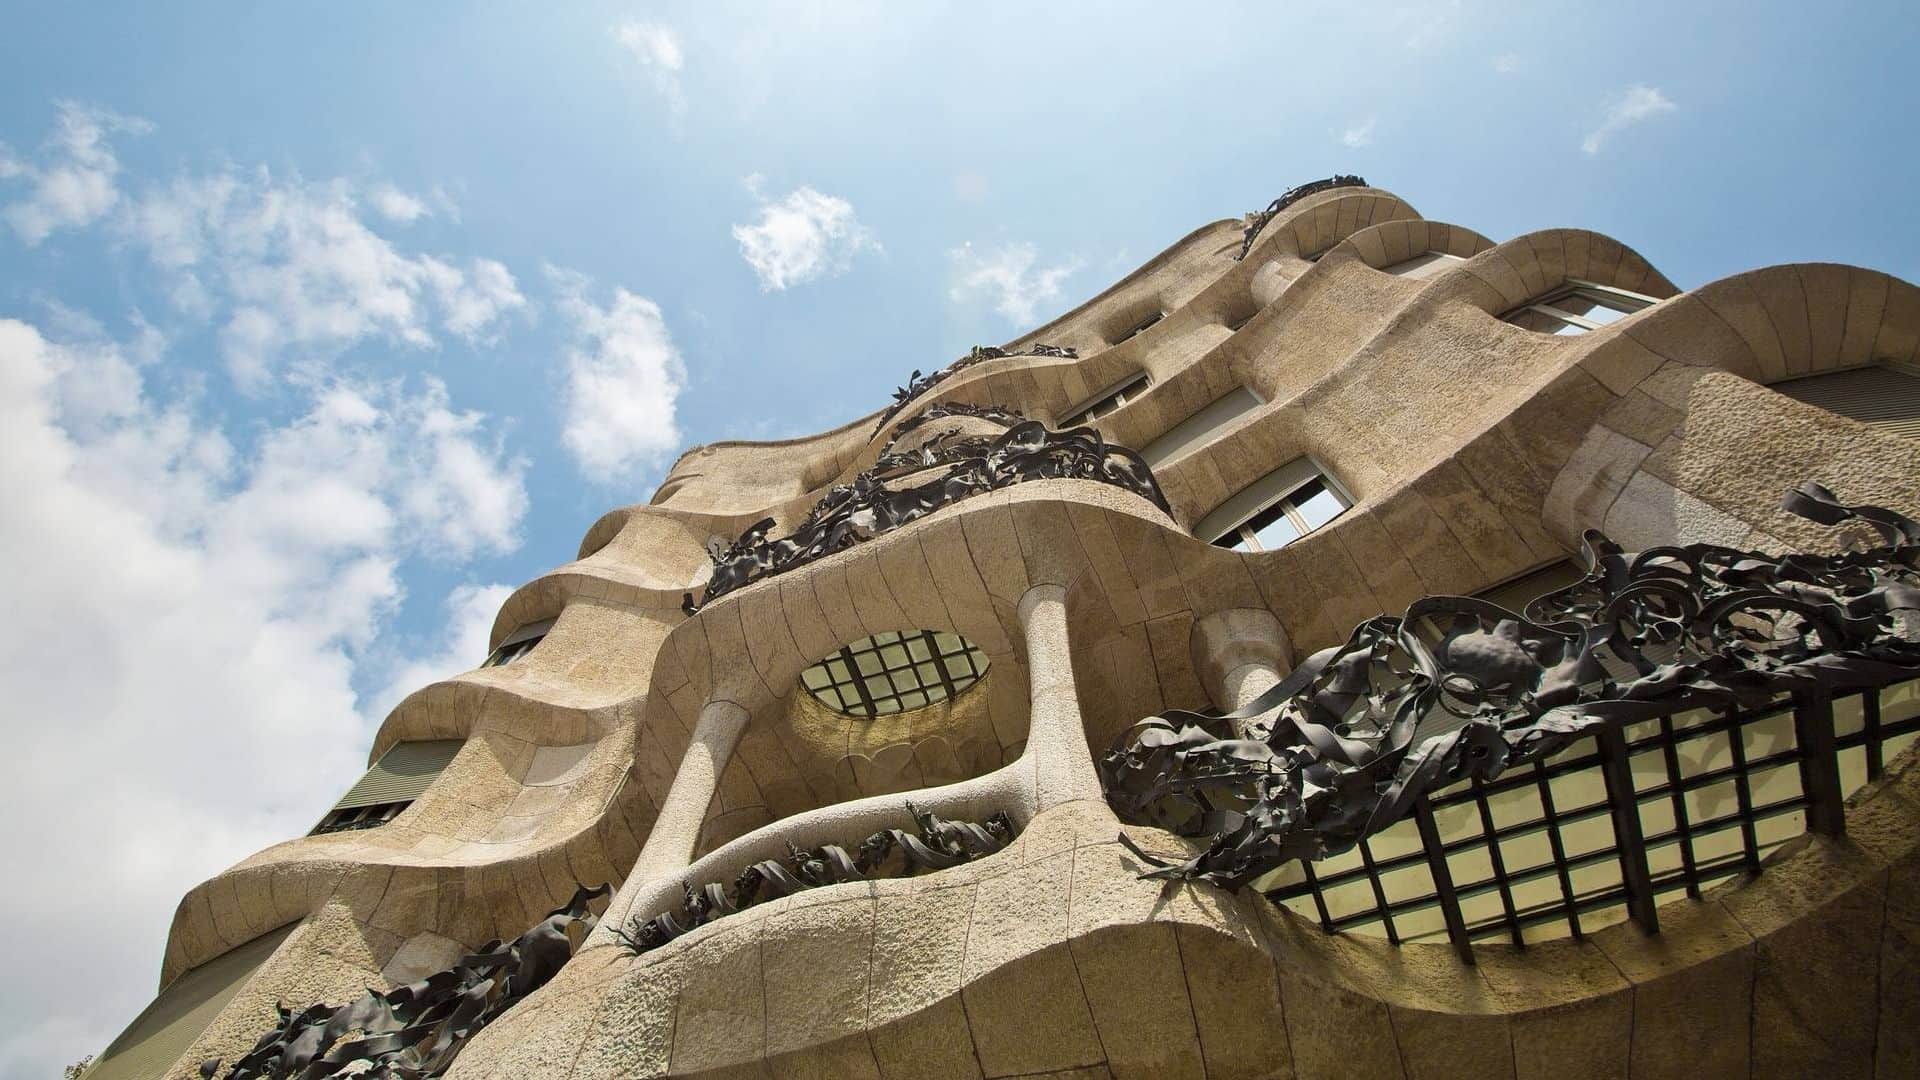 Gaudi's Modernist Legacy Walking Tour - In out Barcelona Tours